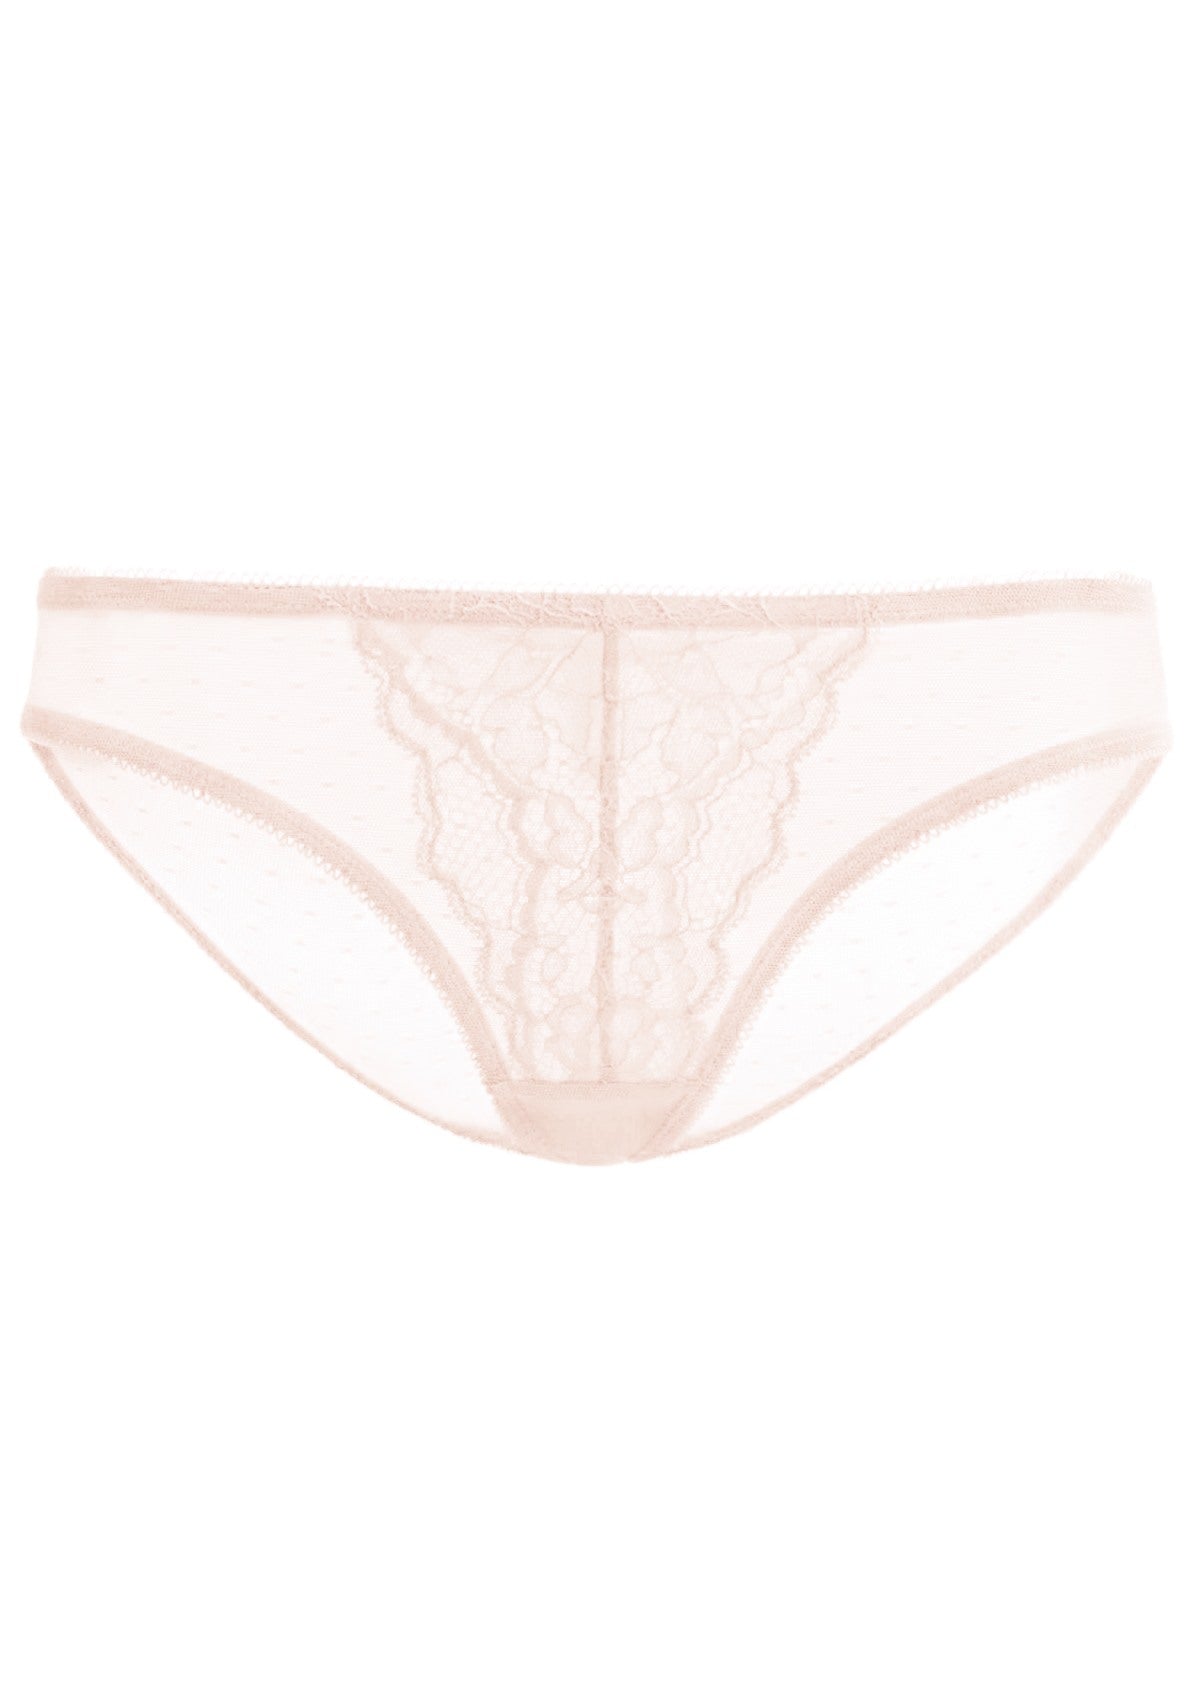 HSIA Mid-Rise Sheer Stylish Lace-Trimmed Supportive Comfy Mesh Pantie - L / Dusty Peach